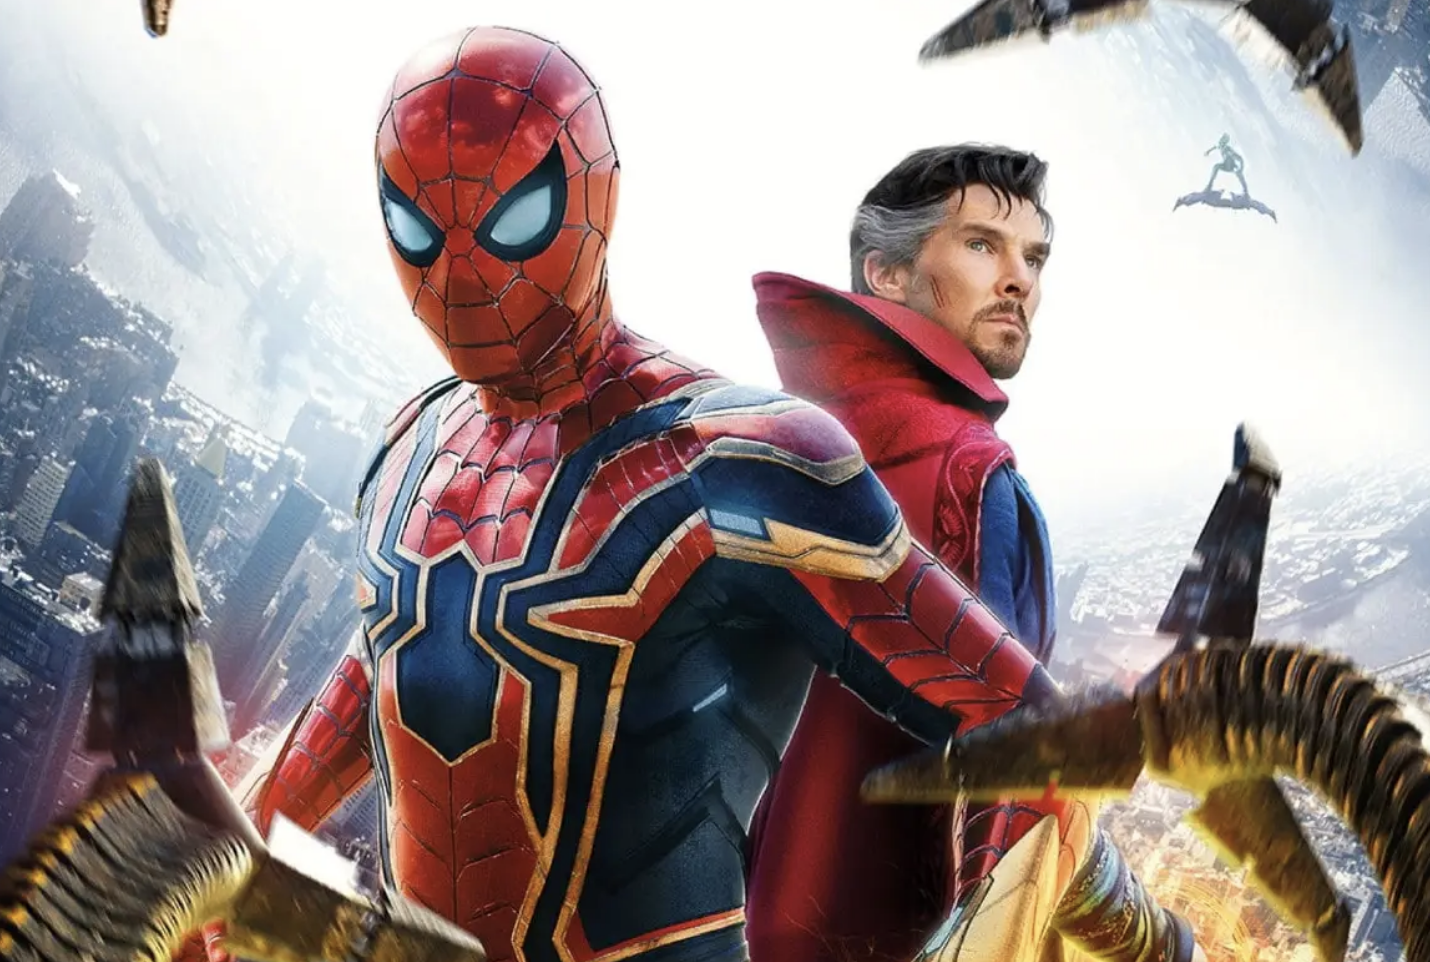 “SpiderMan : No Way Home” collects $253 Million in just the opening weekend!